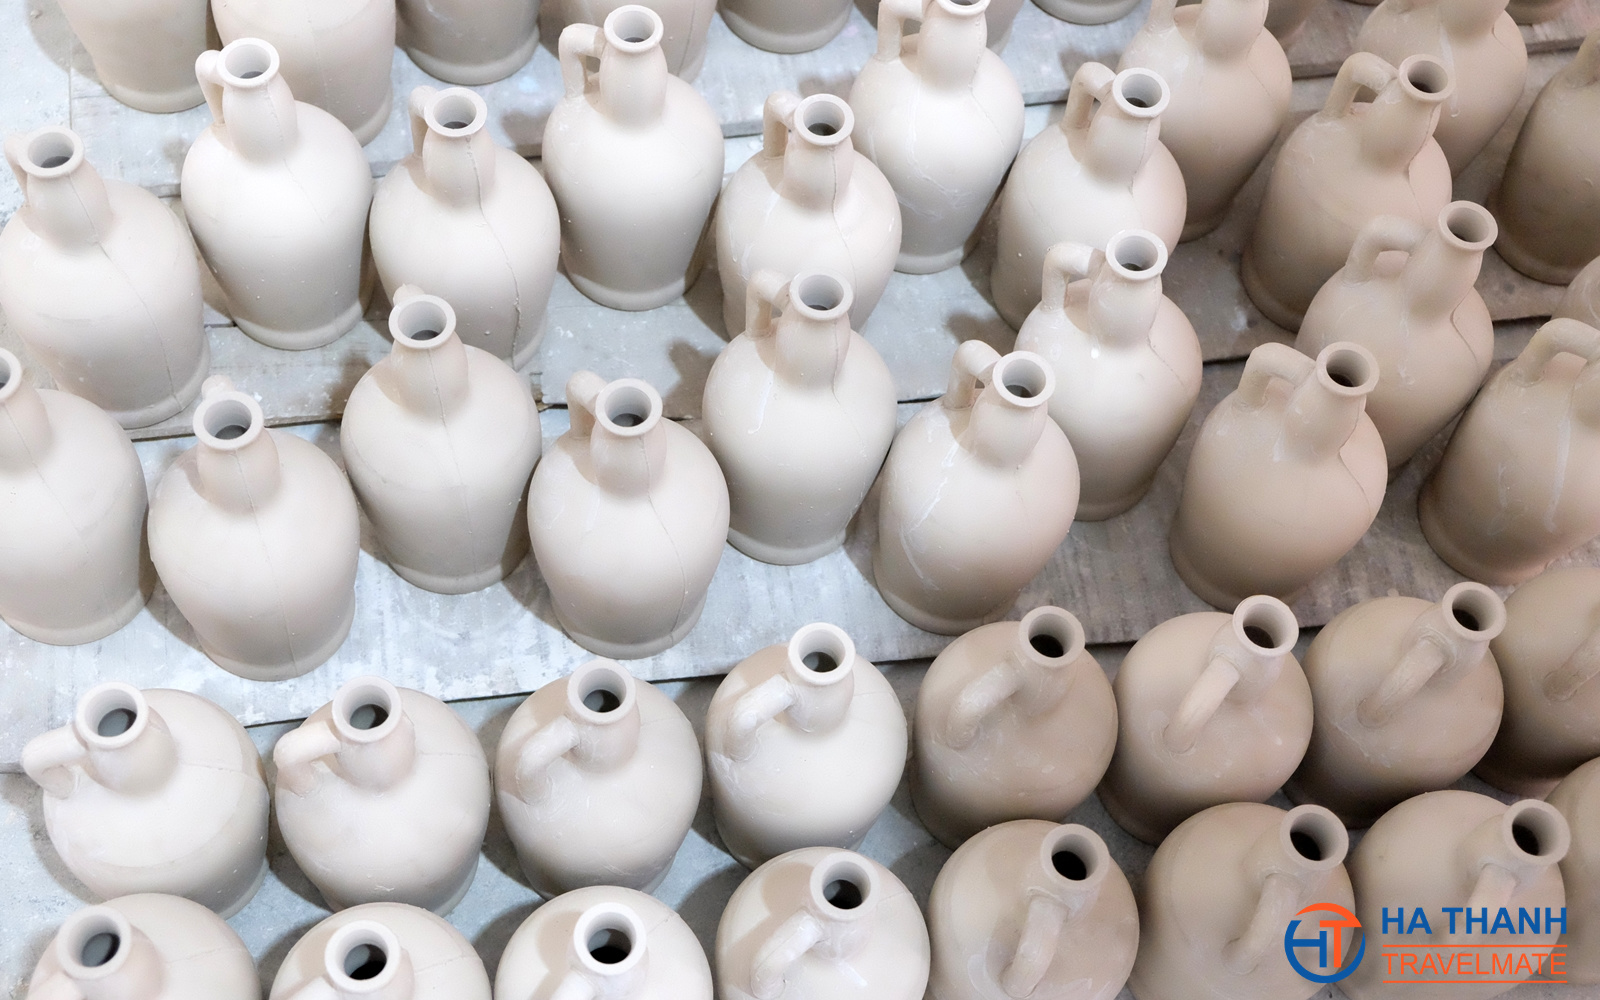 Read more about the article Bat Trang Ceramic Village Half Day Tour